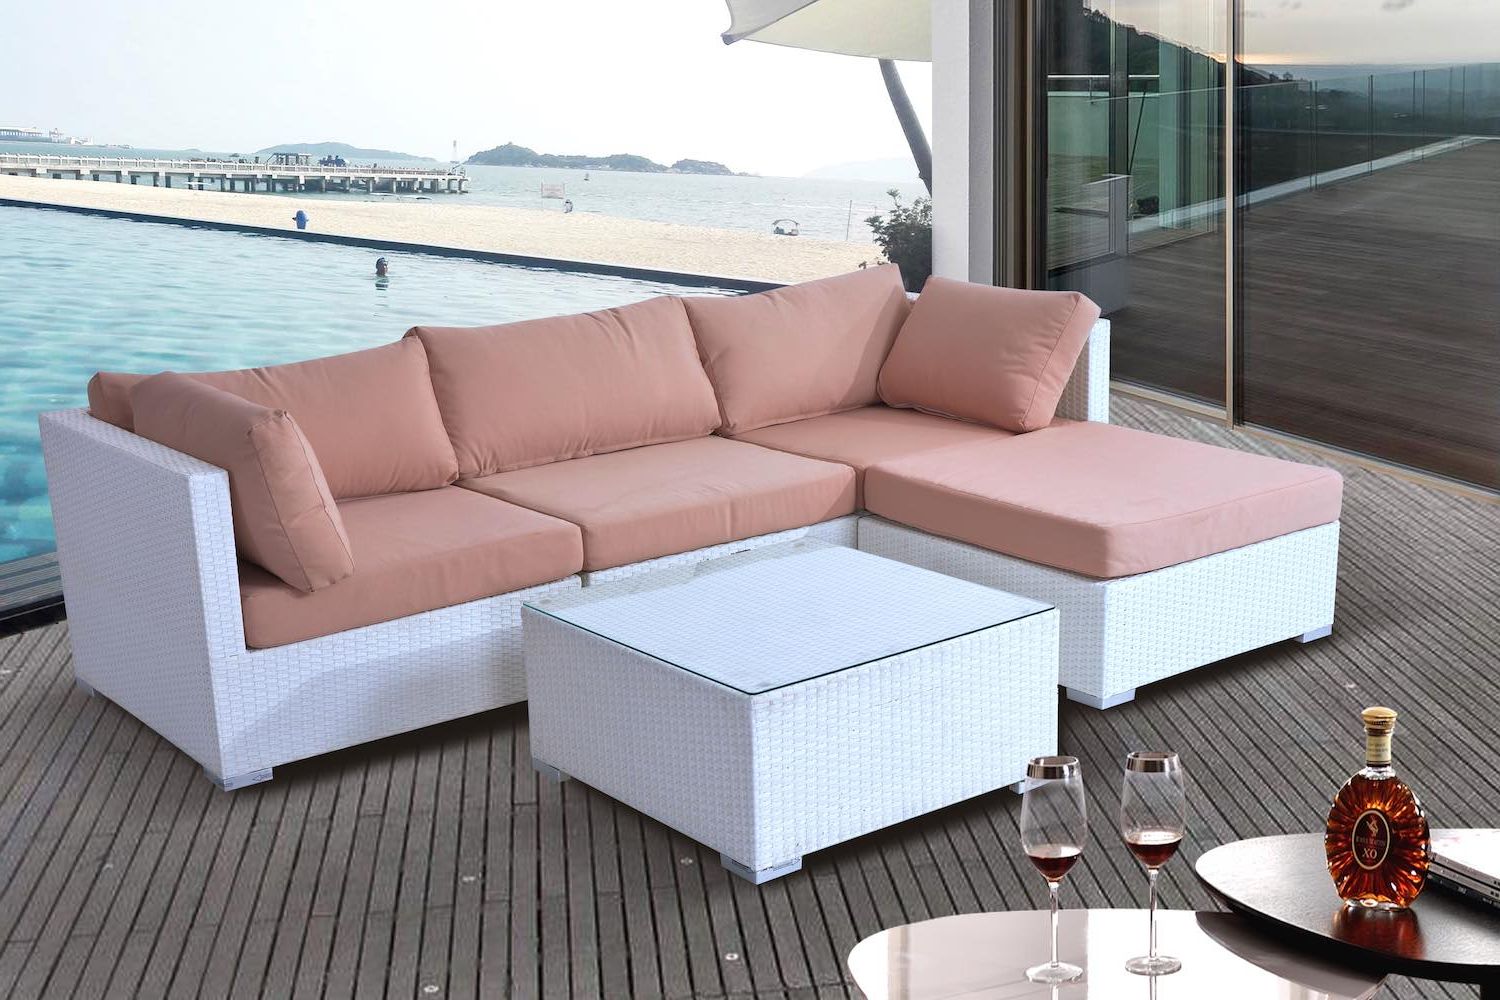 Most Recently Released White Wicker Sectional Sofa Set – Patio Furniturevelago Intended For Outdoor Wicker Sectional Sofa Sets (View 7 of 15)